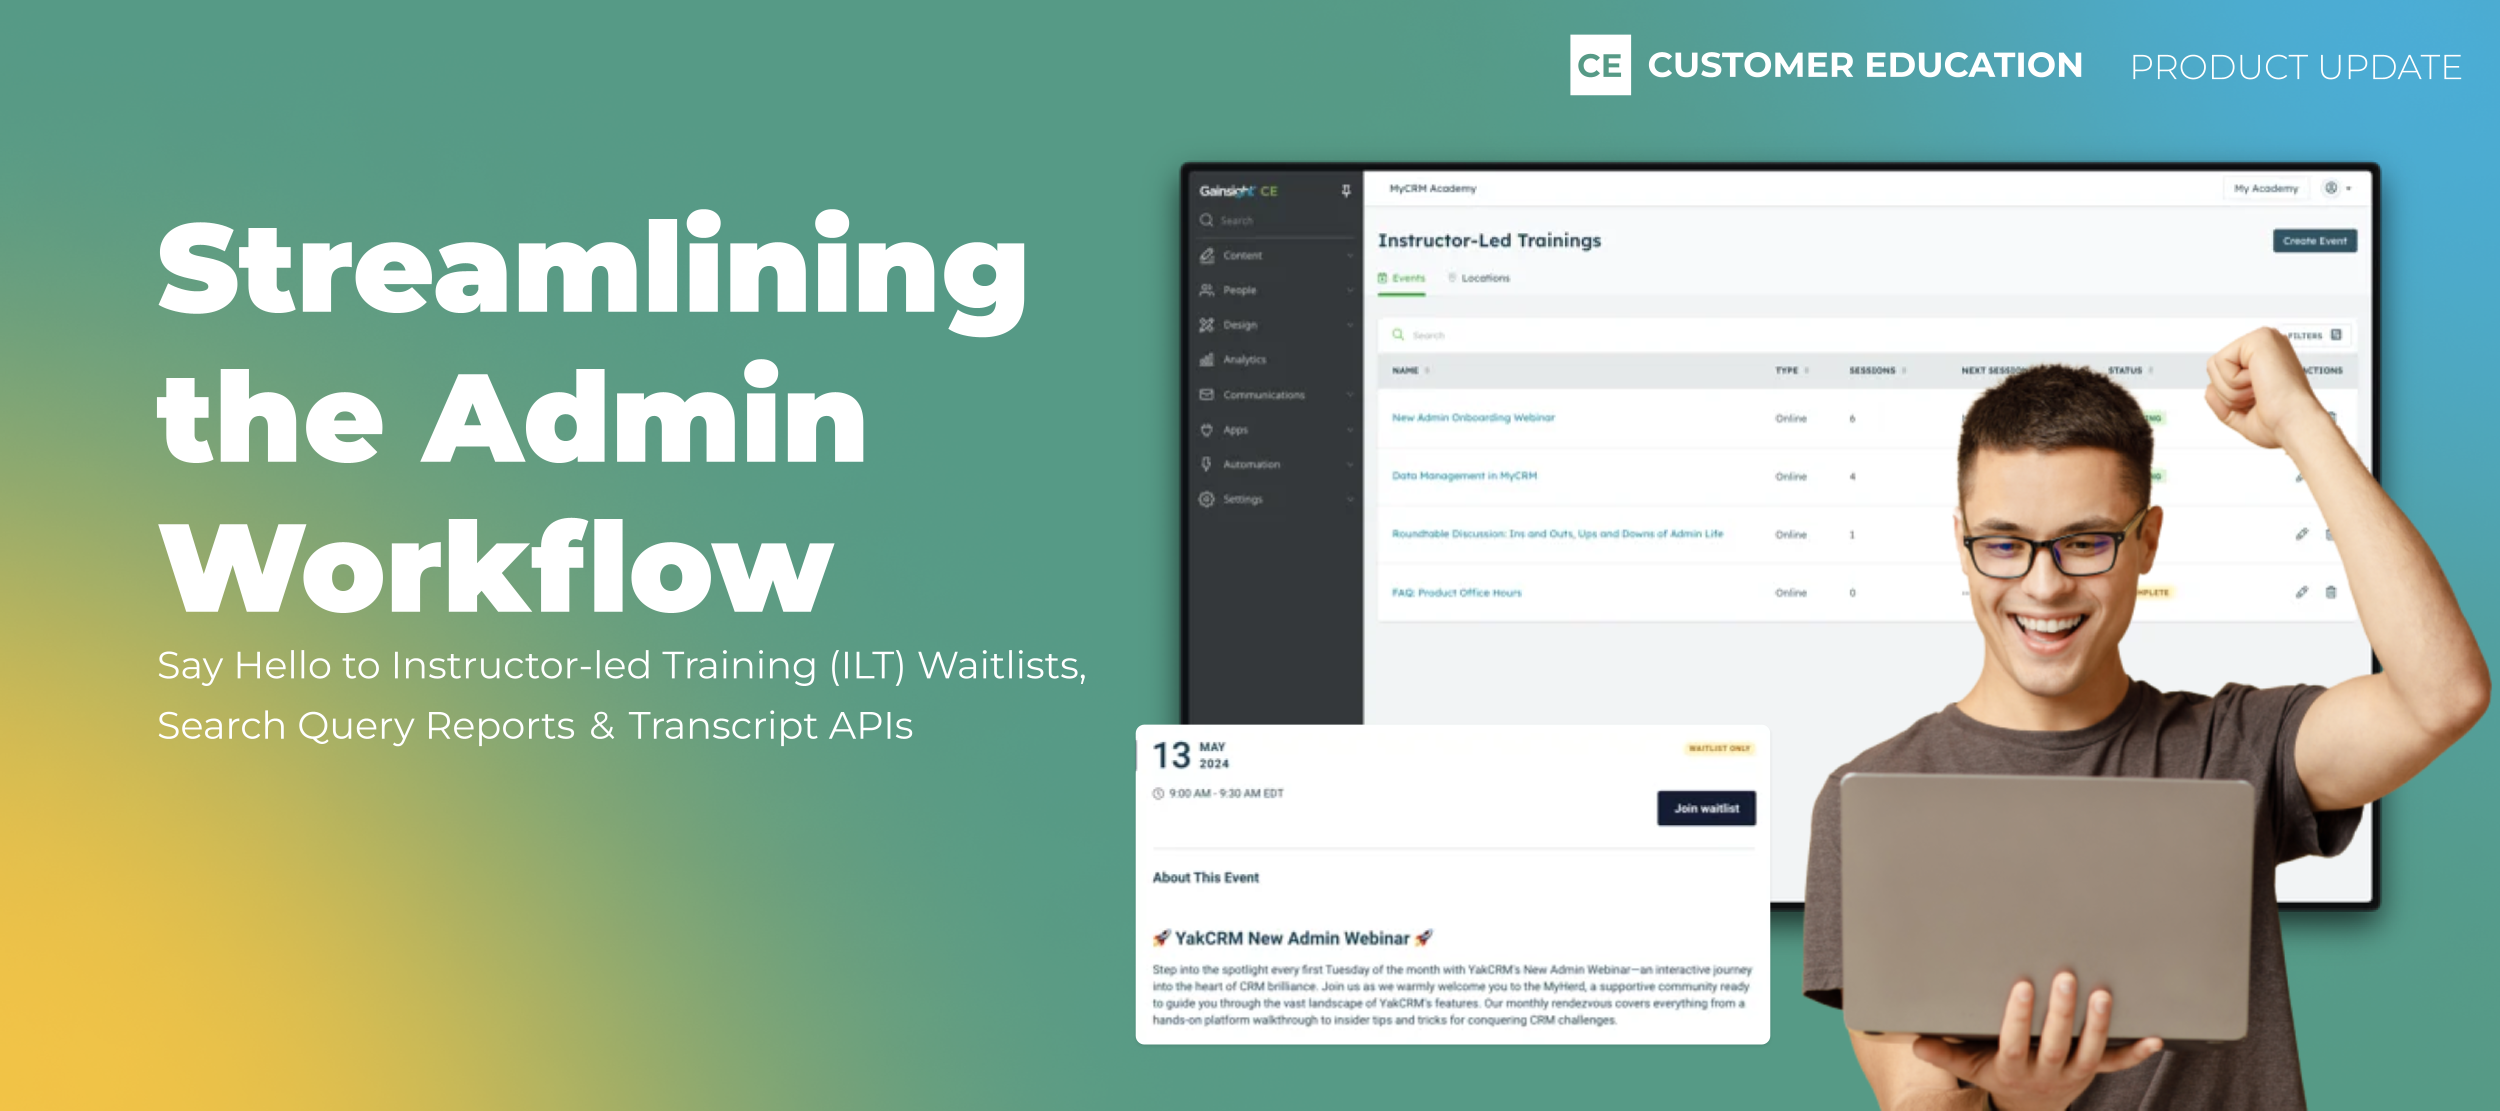 Streamlining the Admin Workflow with Instructor-led Training (ILT) Waitlists, Search Query Reports, and Transcript APIs